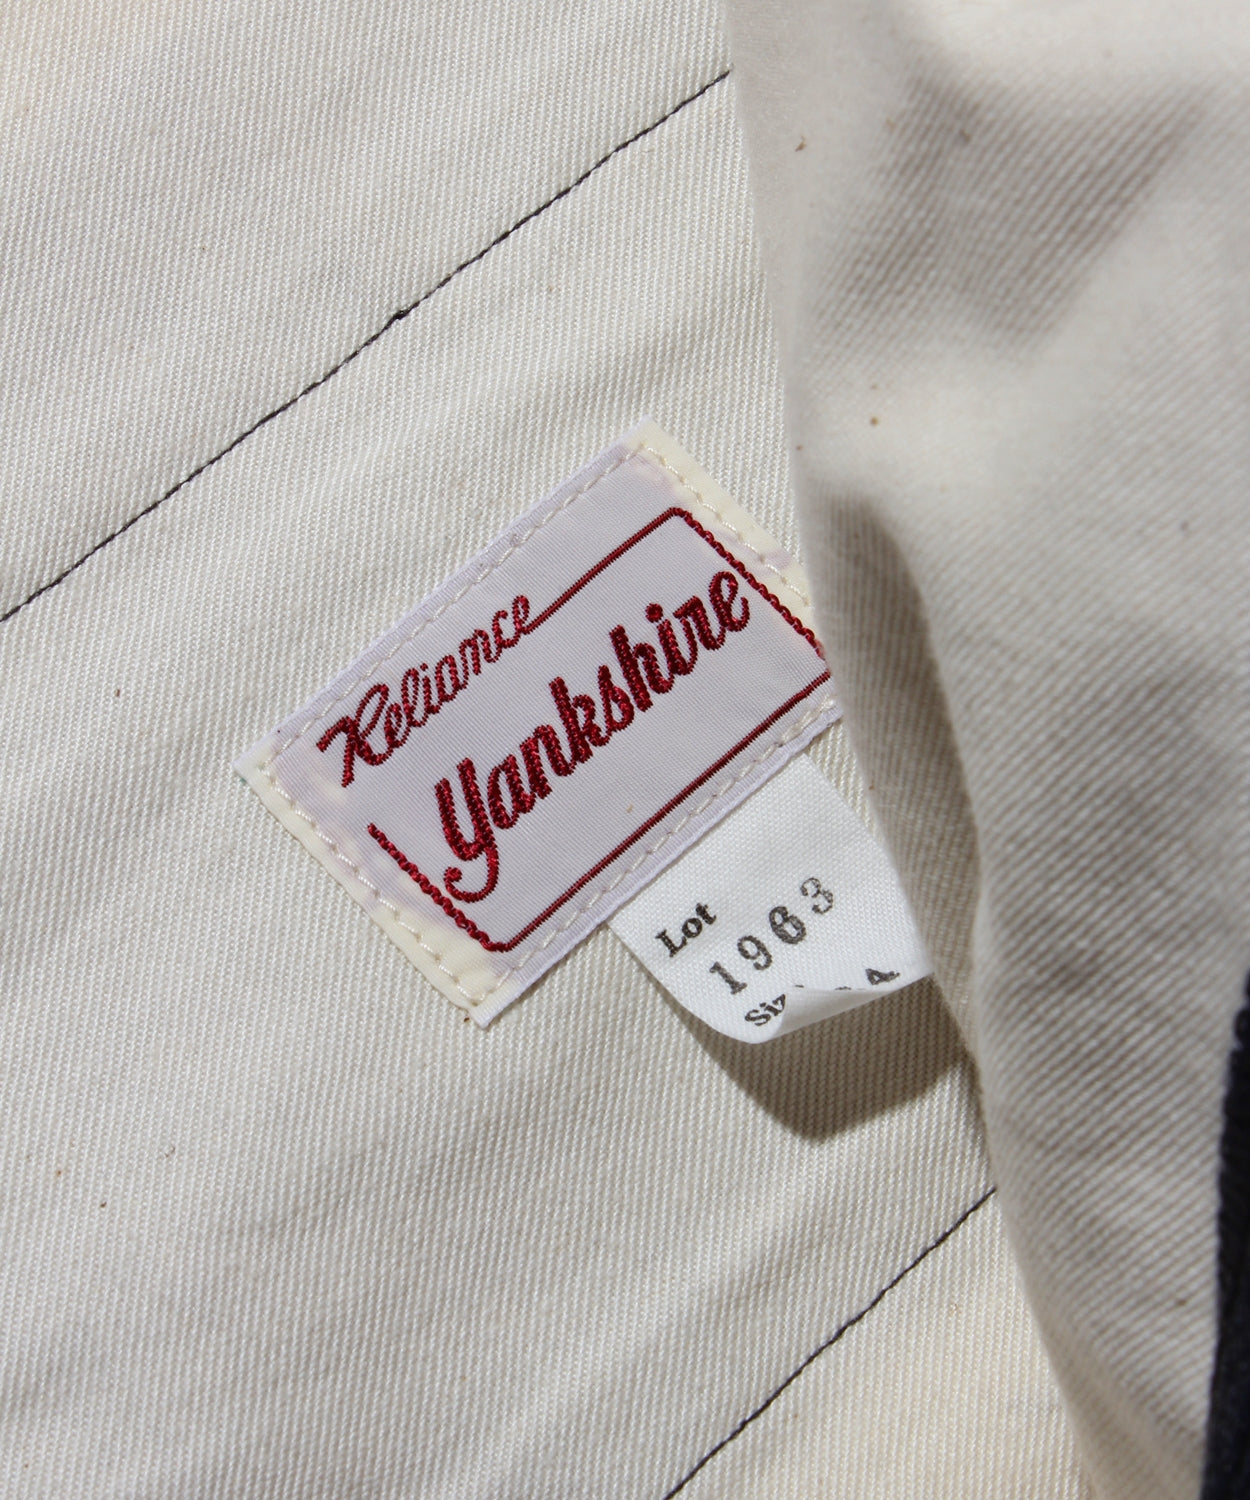 【YANKSHIRE】TROUSERS 1963 STAY PRESSED TWILL / GRAY